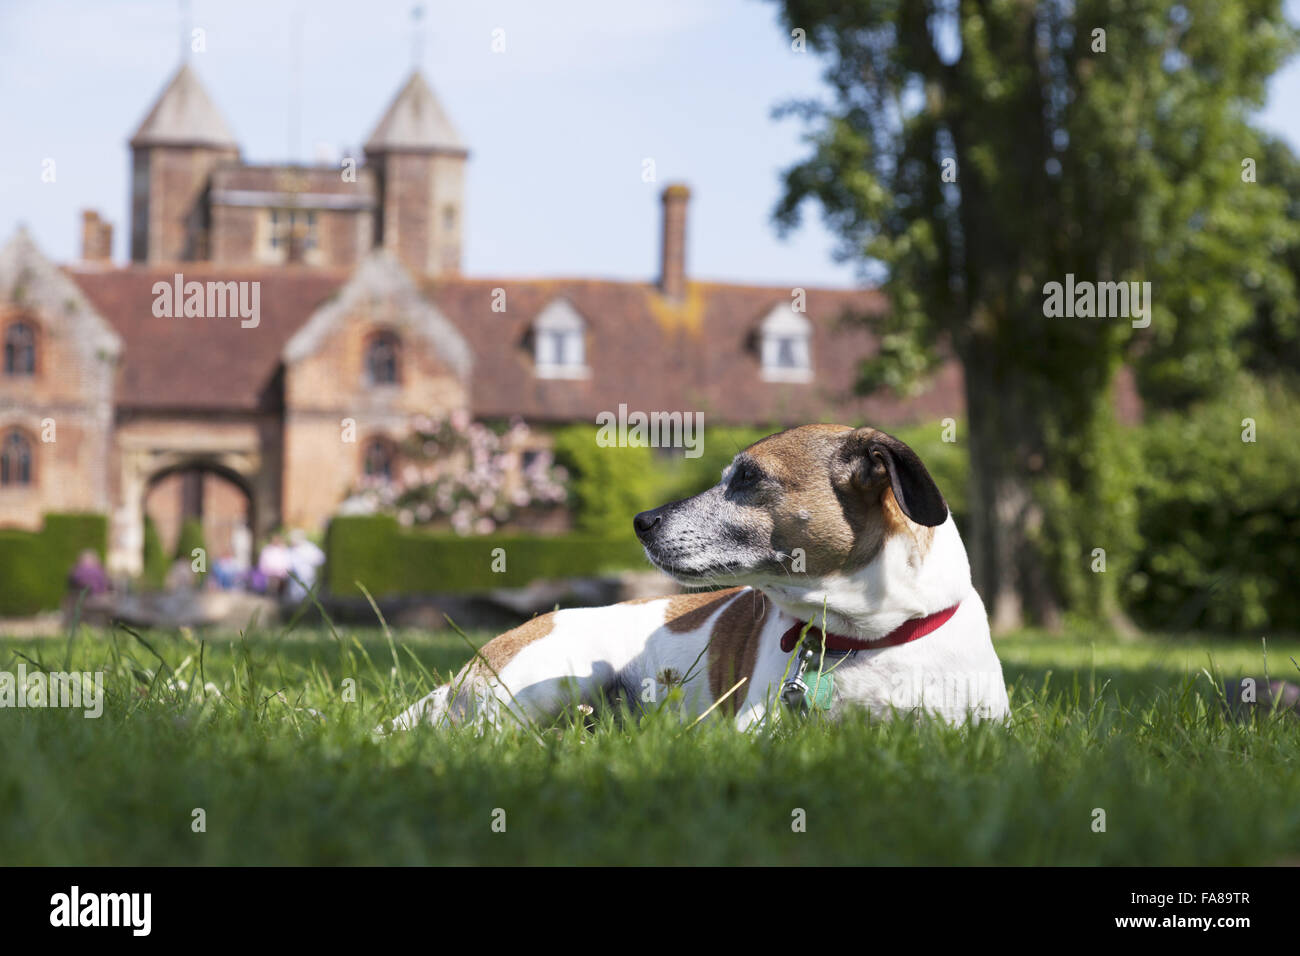 A dog enjoying the gardens at Sissinghurst Castle, Kent. Sissinghurst gained international fame in the 1930s when Vita Sackville-West and Harold Nicolson created a garden there. Stock Photo